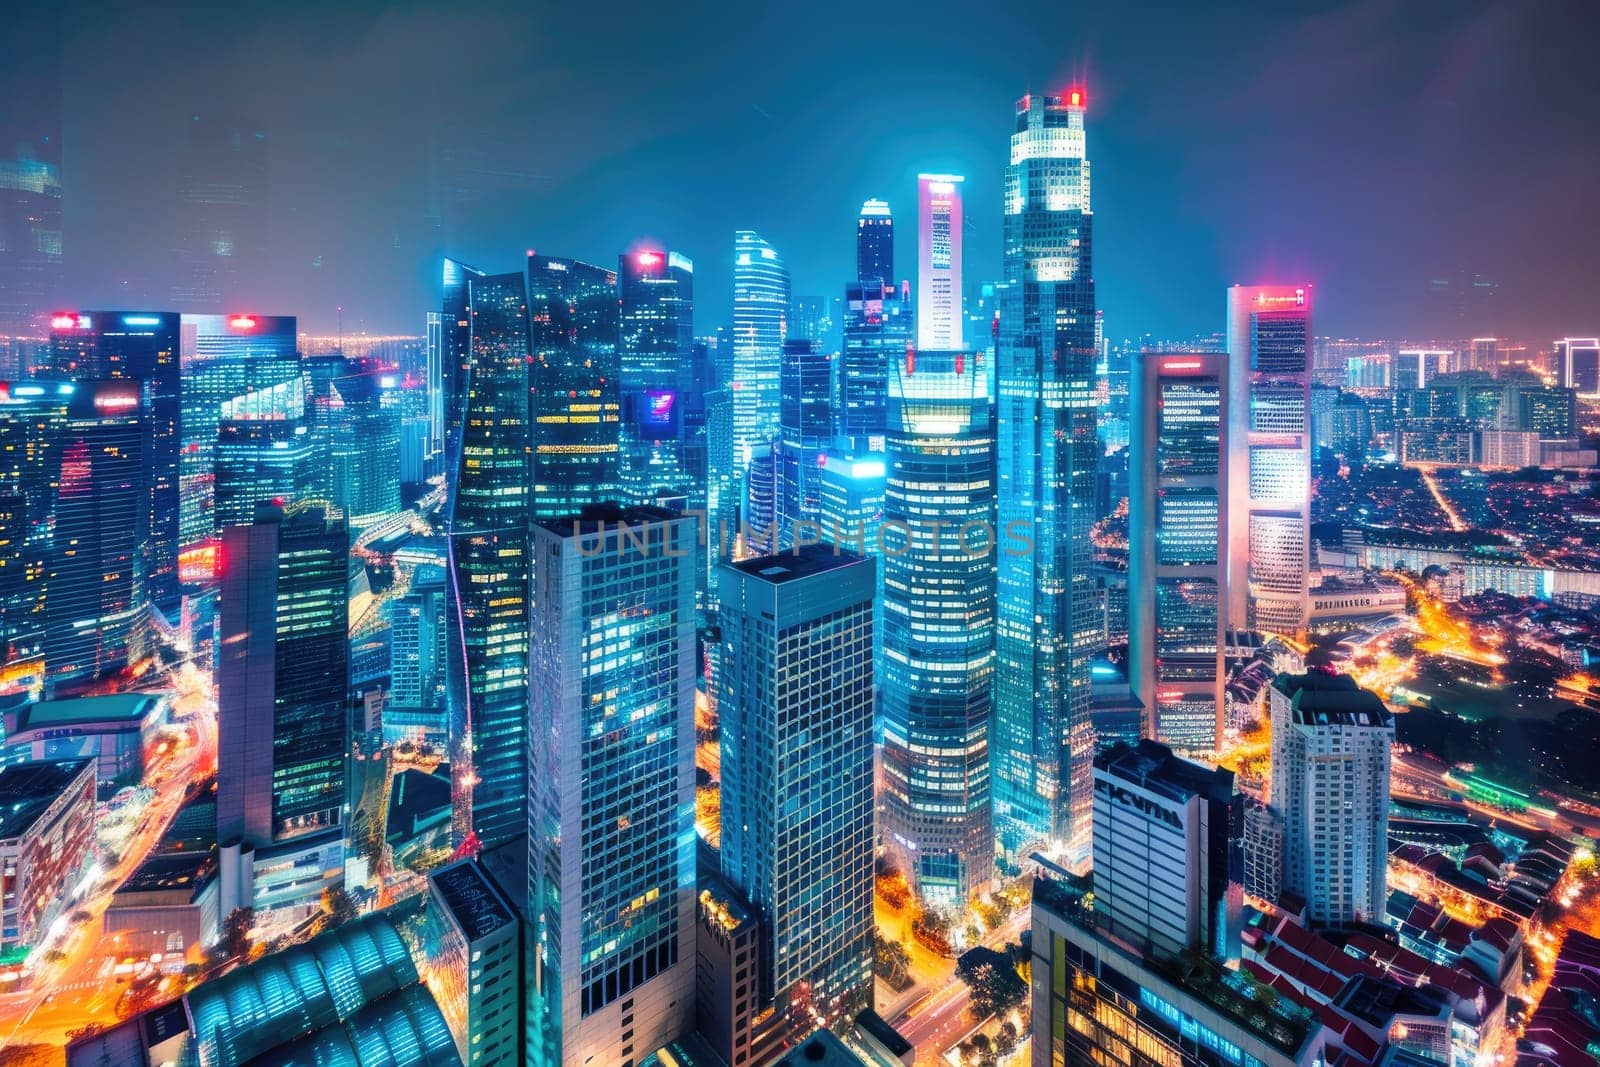 A bustling cityscape at night with vibrant lights